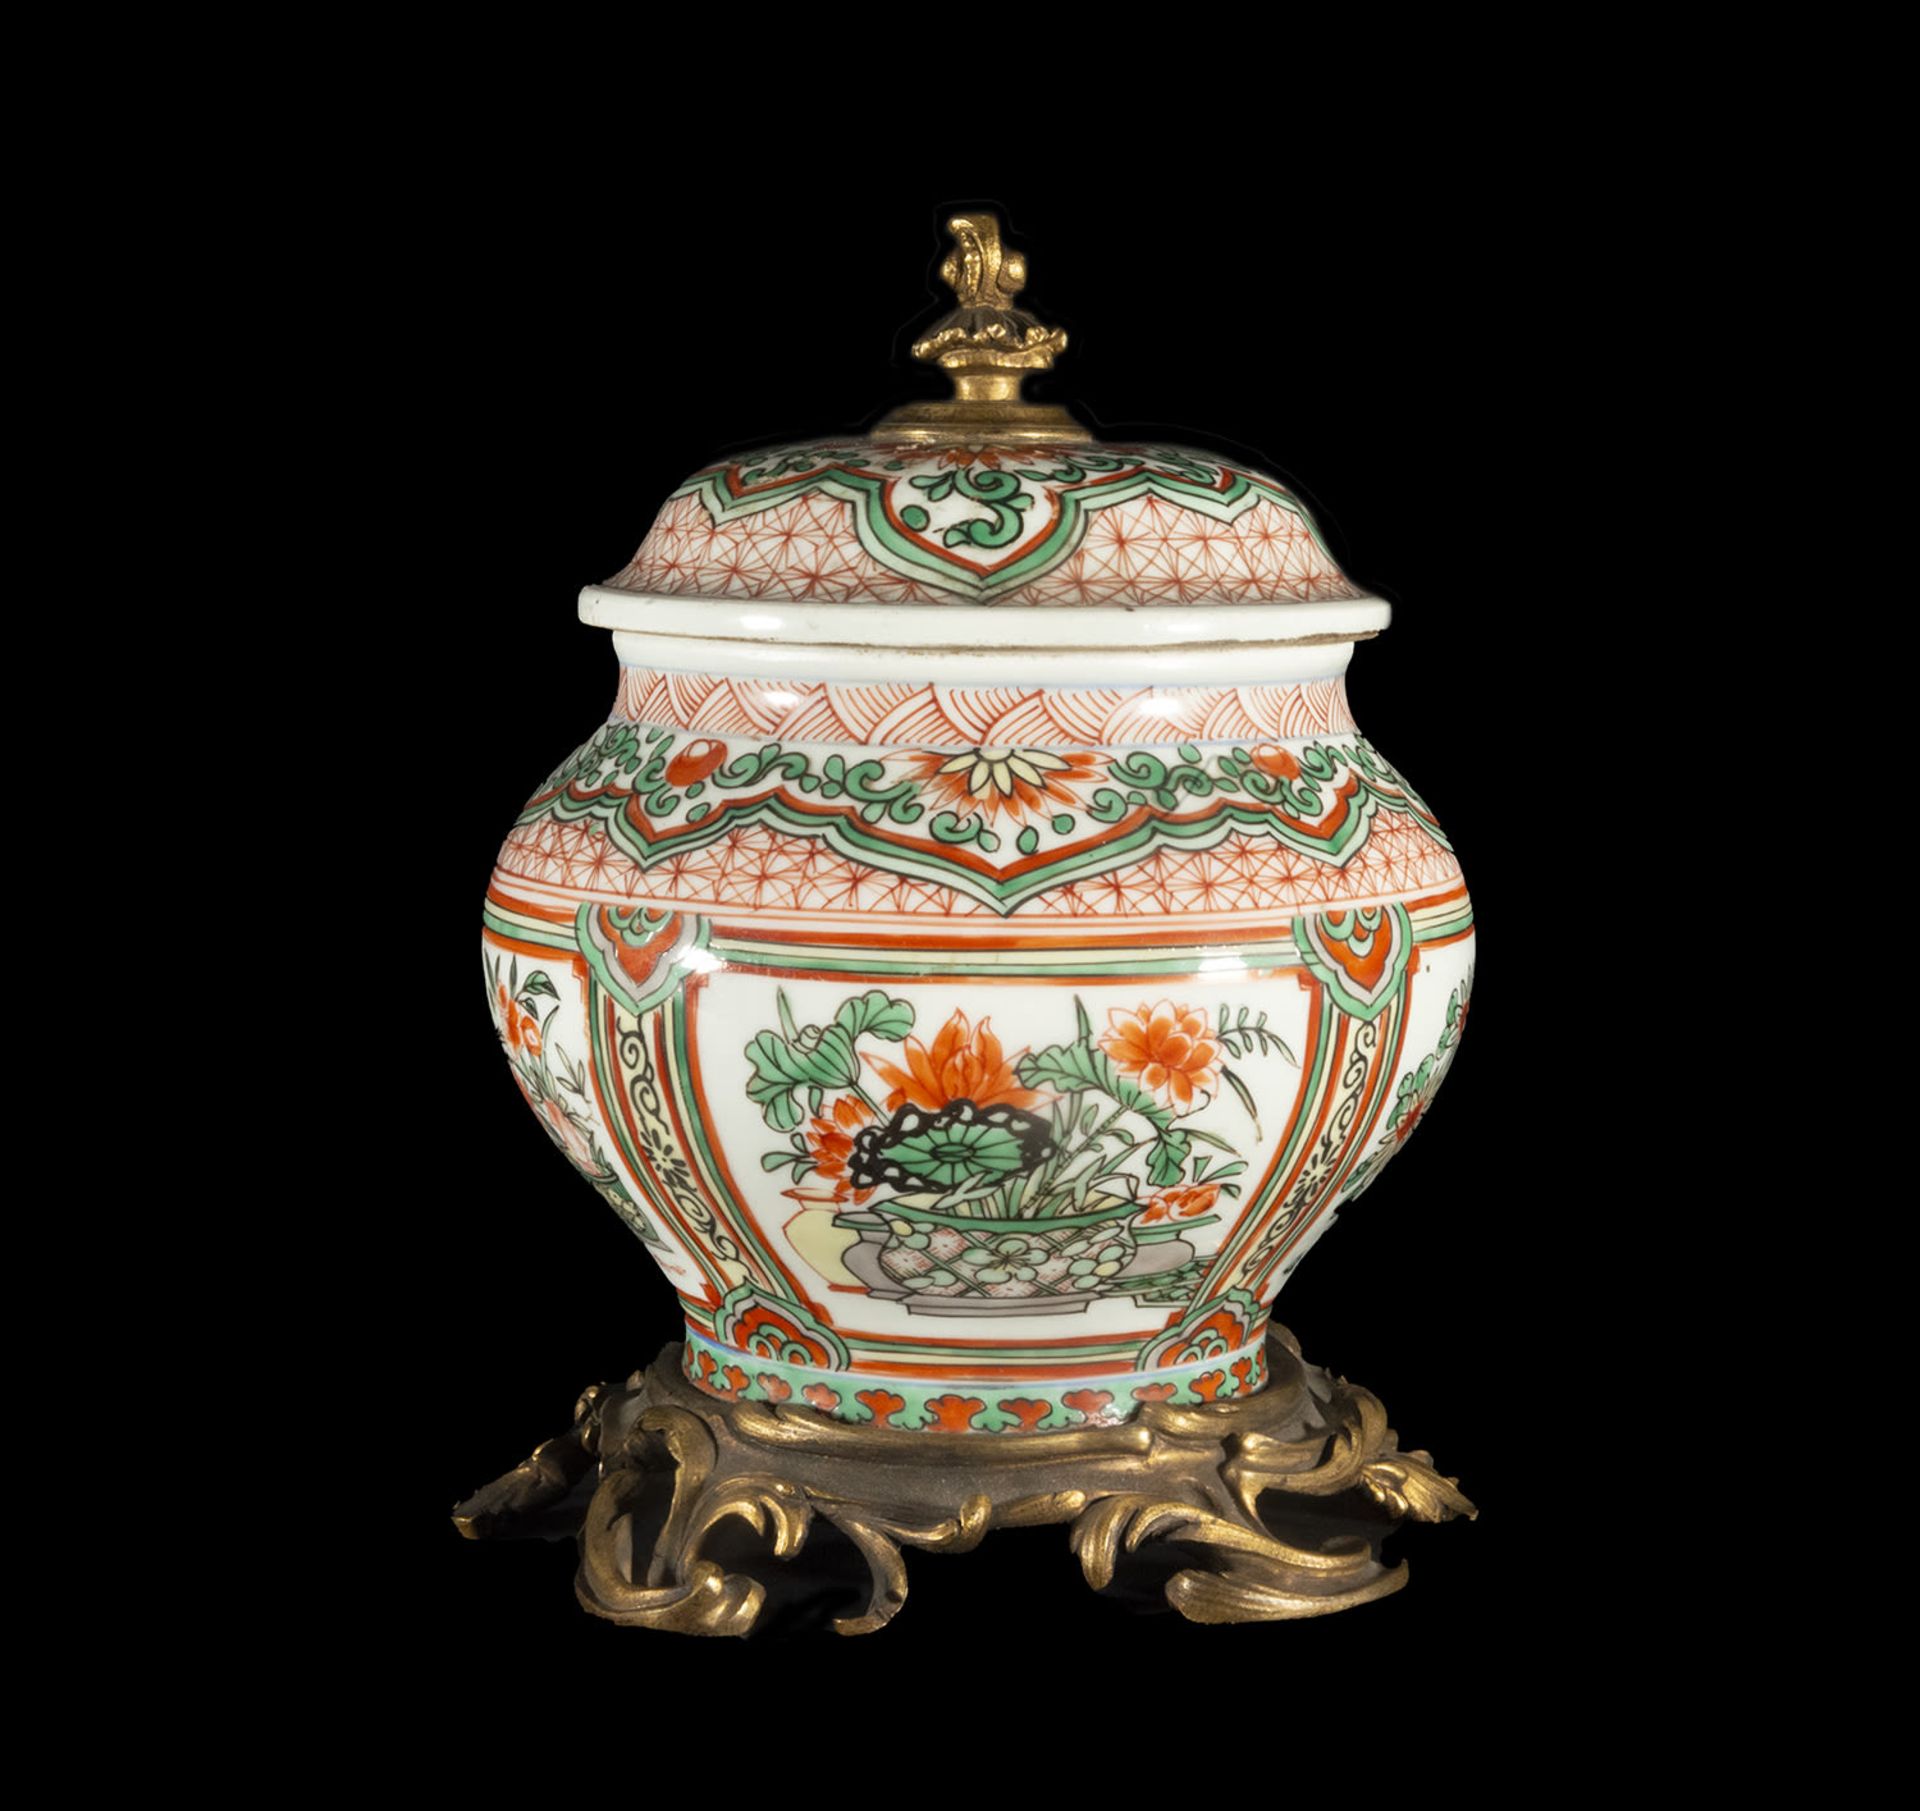 Potiche mounted in mercury-gilded bronze in Samson porcelain in the Chinese Kangxi famille verte sty